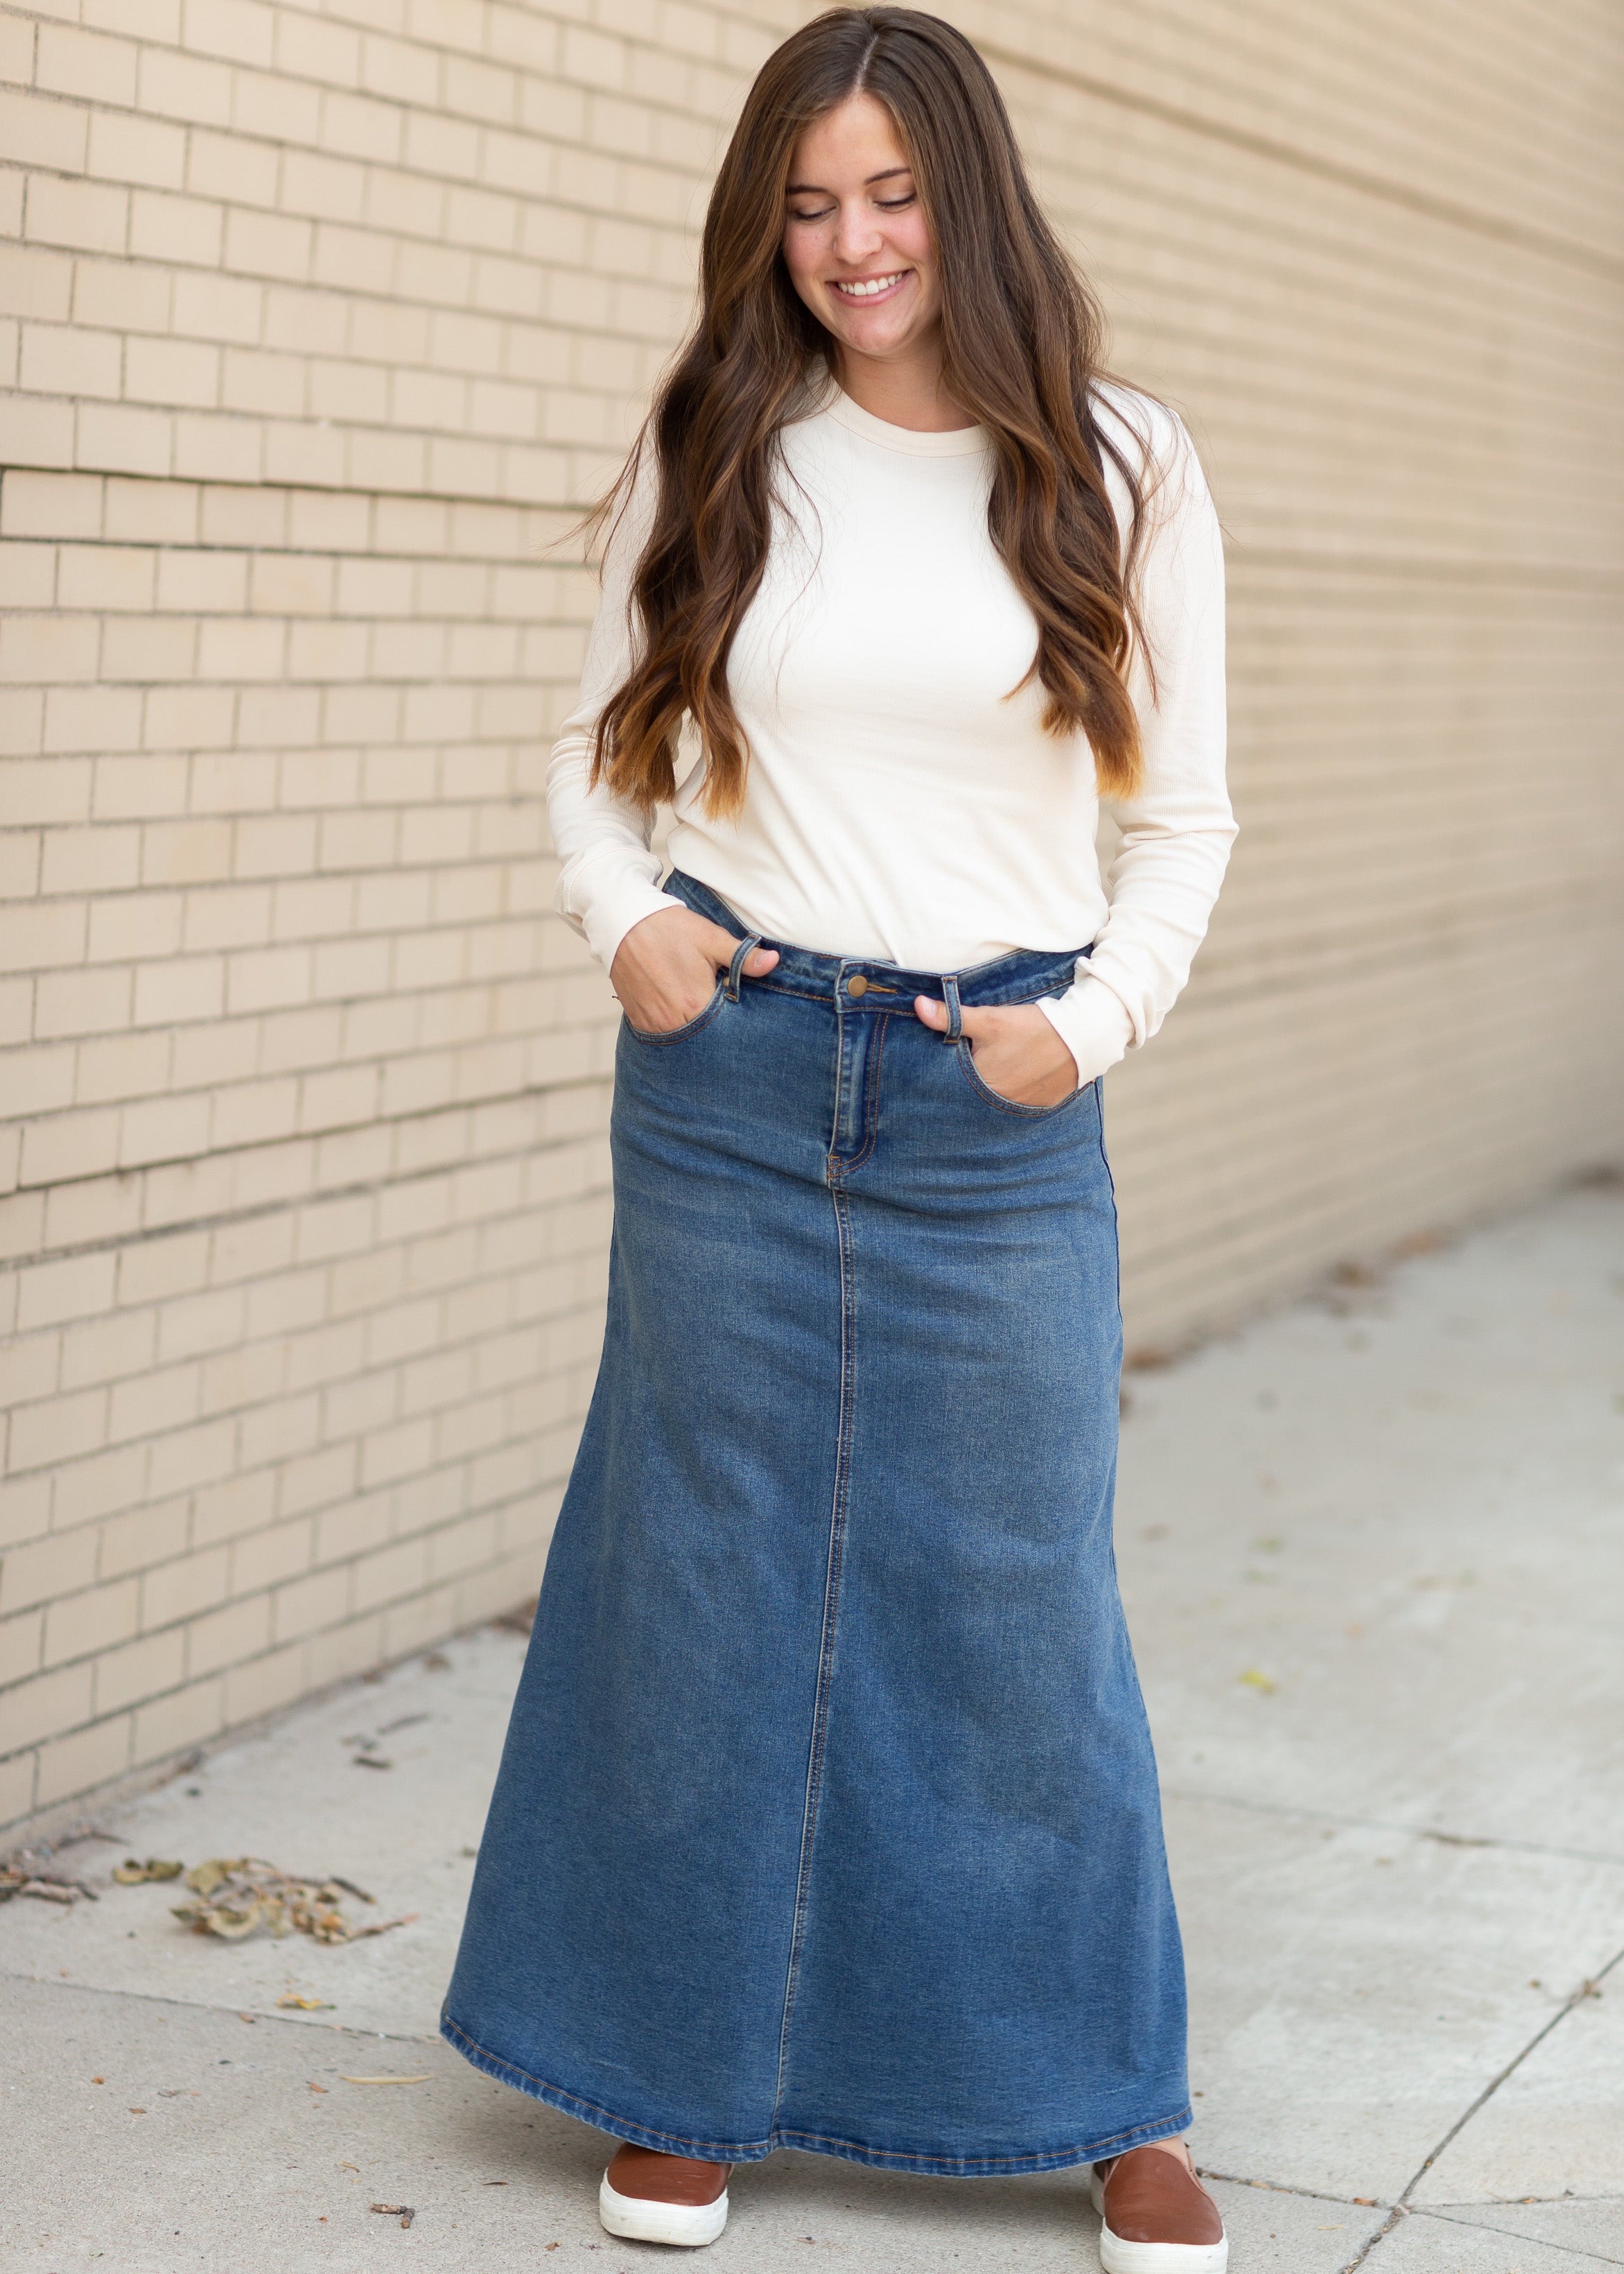 Long Denim Skirts Are Trending - House Of Hipsters